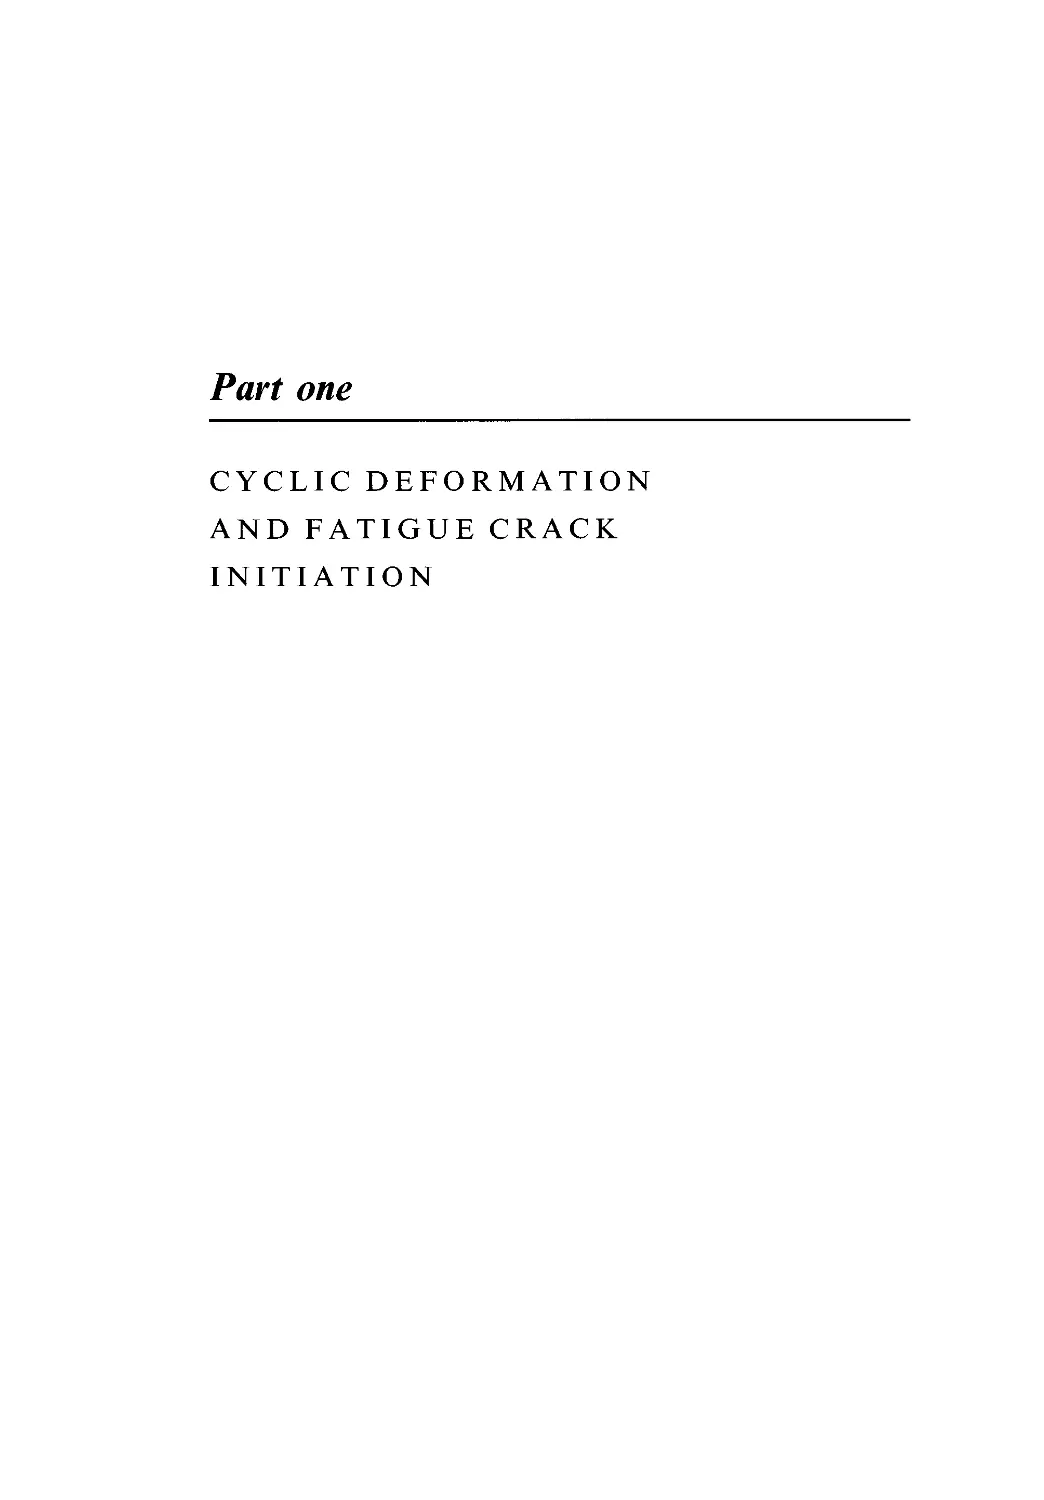 PART ONE - CYCLIC DEFORMATION AND FATIGUE CRACK INITIATION